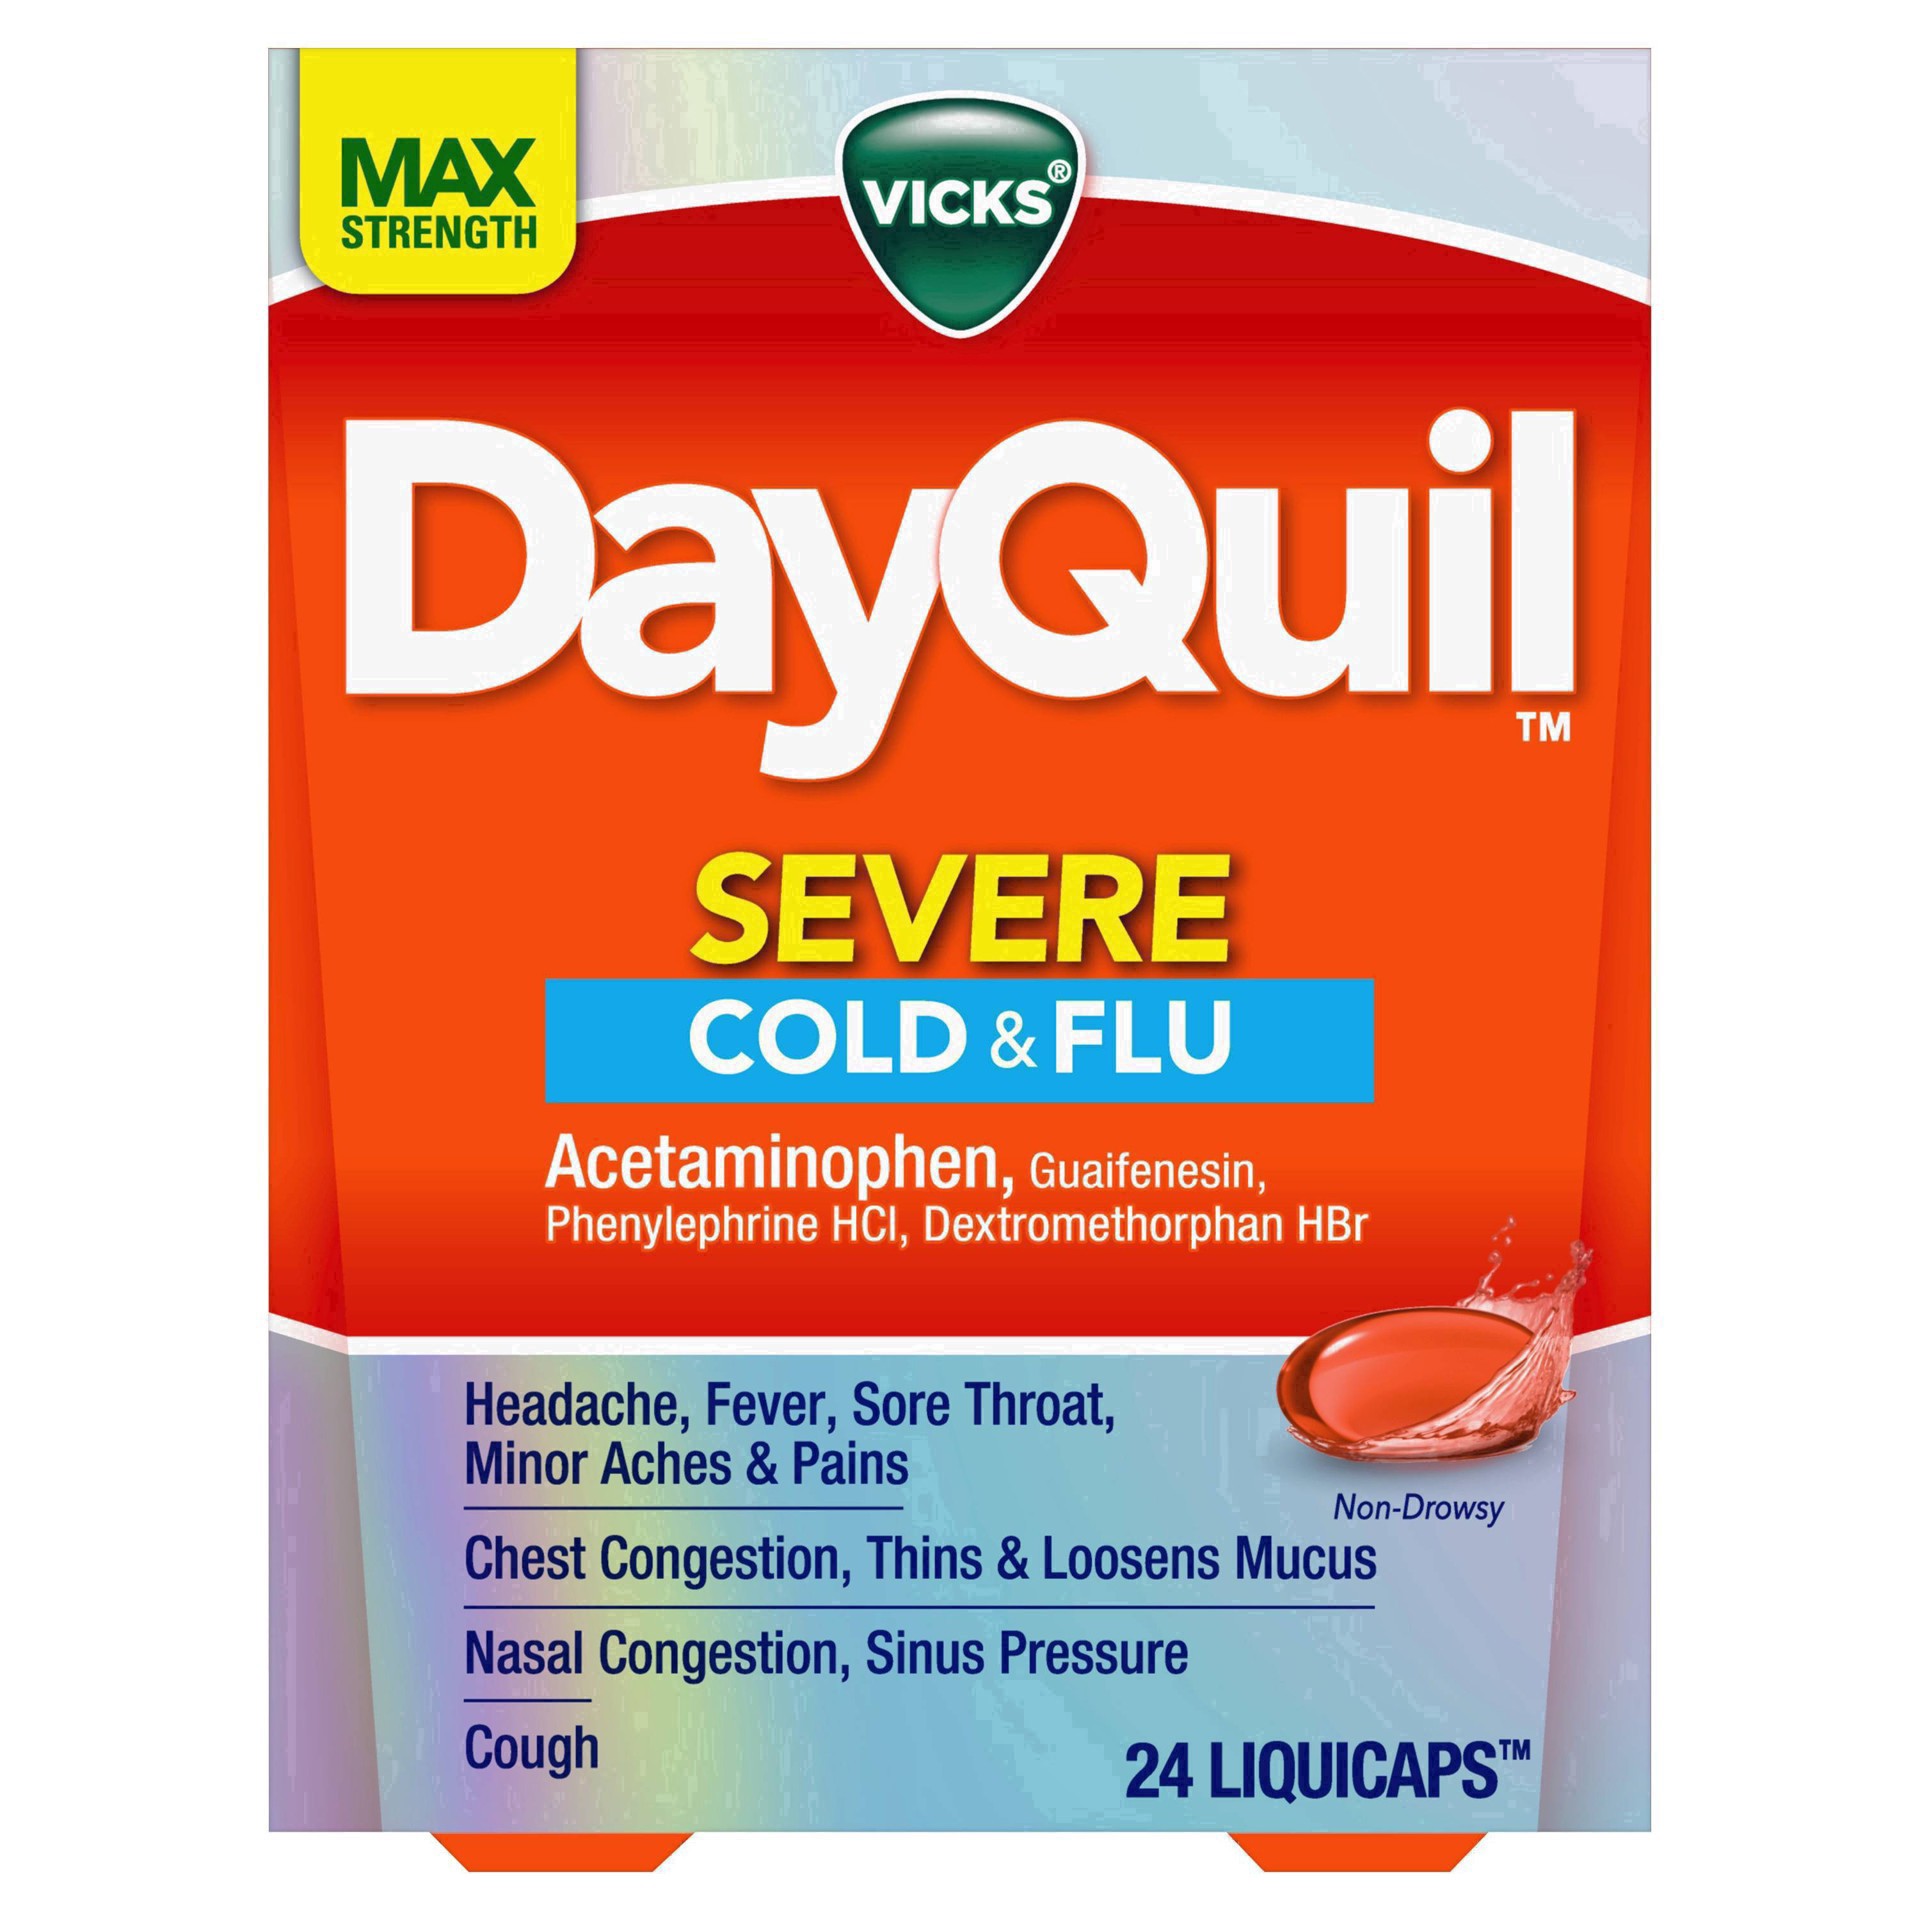 slide 20 of 46, Vicks DayQuil SEVERE Cold & Flu Medicine, Maximum Strength 9-Symptom Non-Drowsy Daytime Relief for Headache, Fever, Sore Throat, Minor Aches and Pains, Chest Congestion, Stuffy Nose, Nasal Congestion, Sinus Pressure, and Cough, 24 Liquicaps, 24 ct